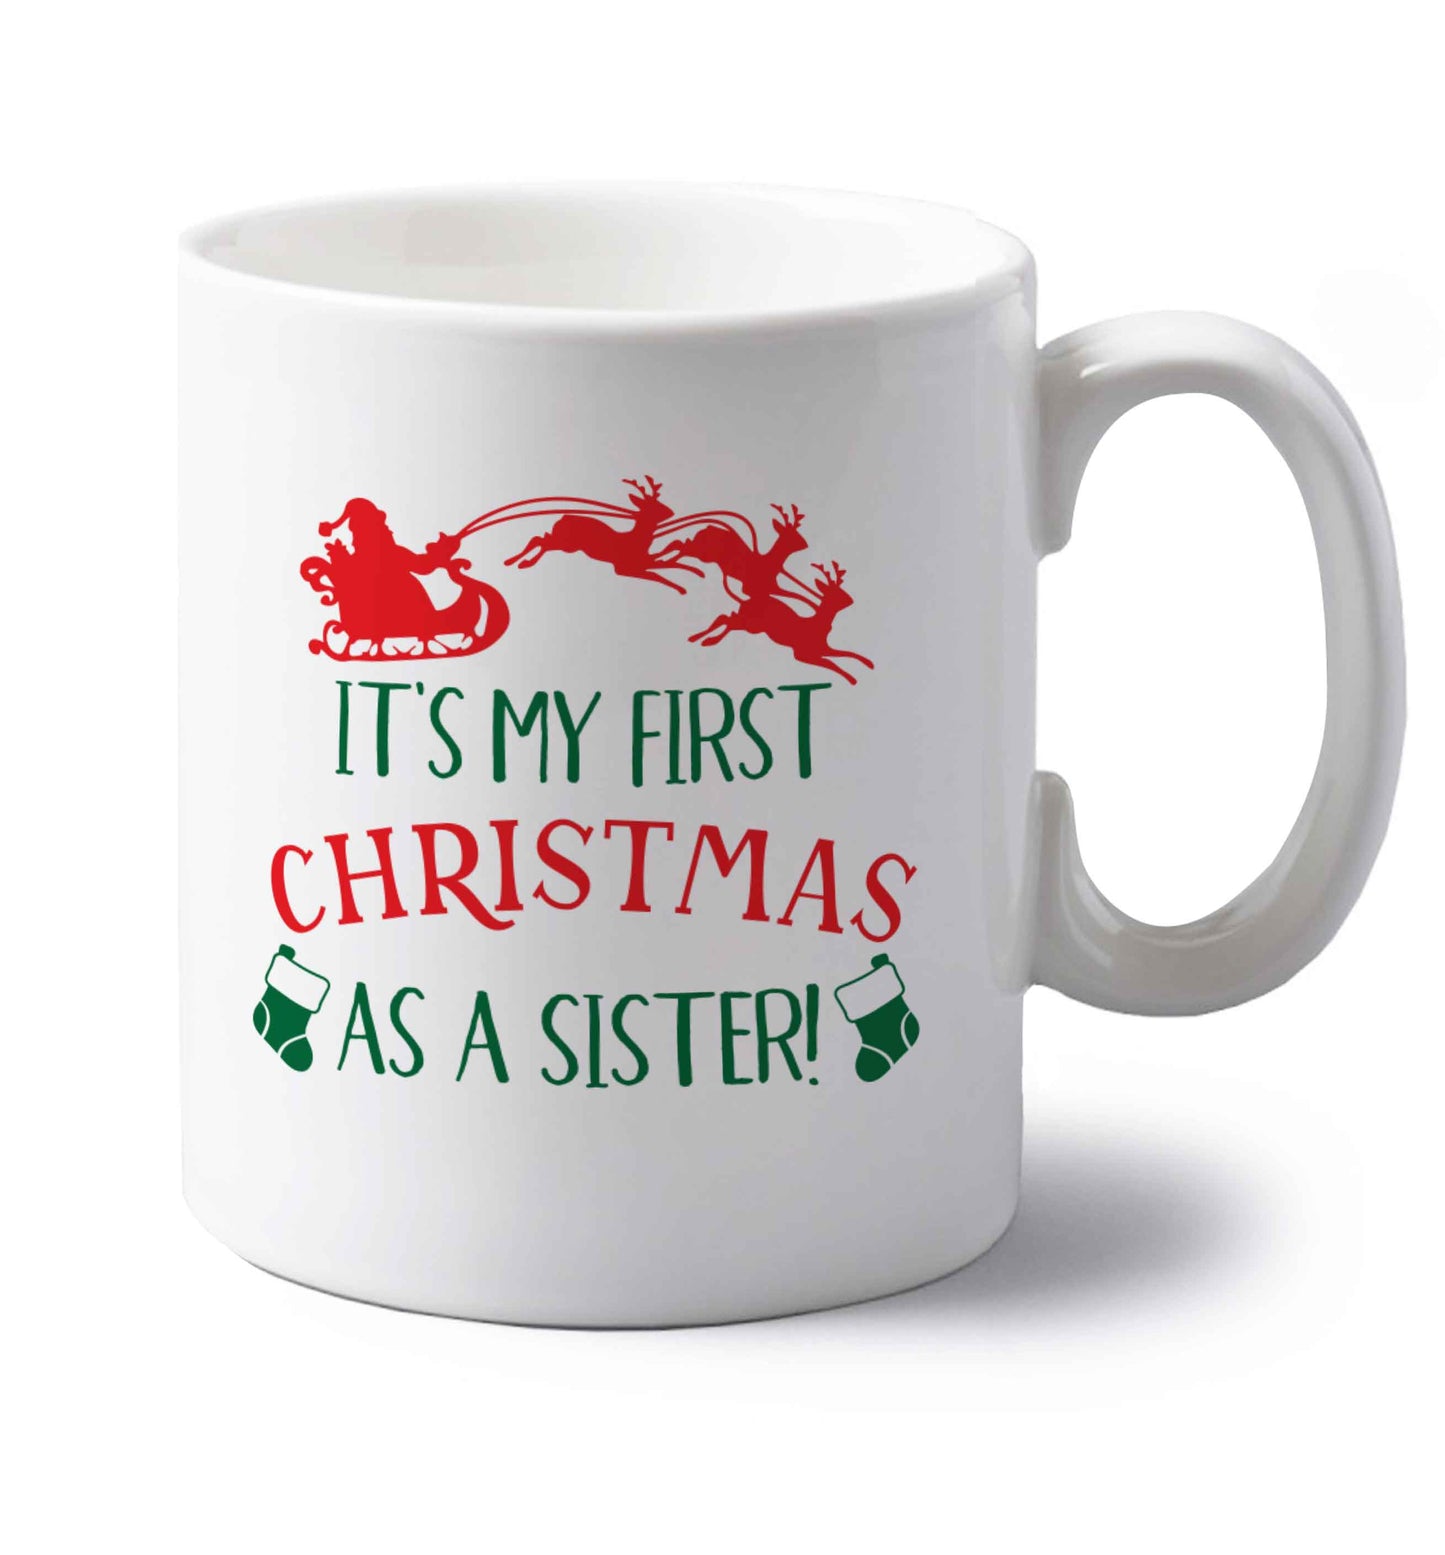 It's my first Christmas as a sister! left handed white ceramic mug 